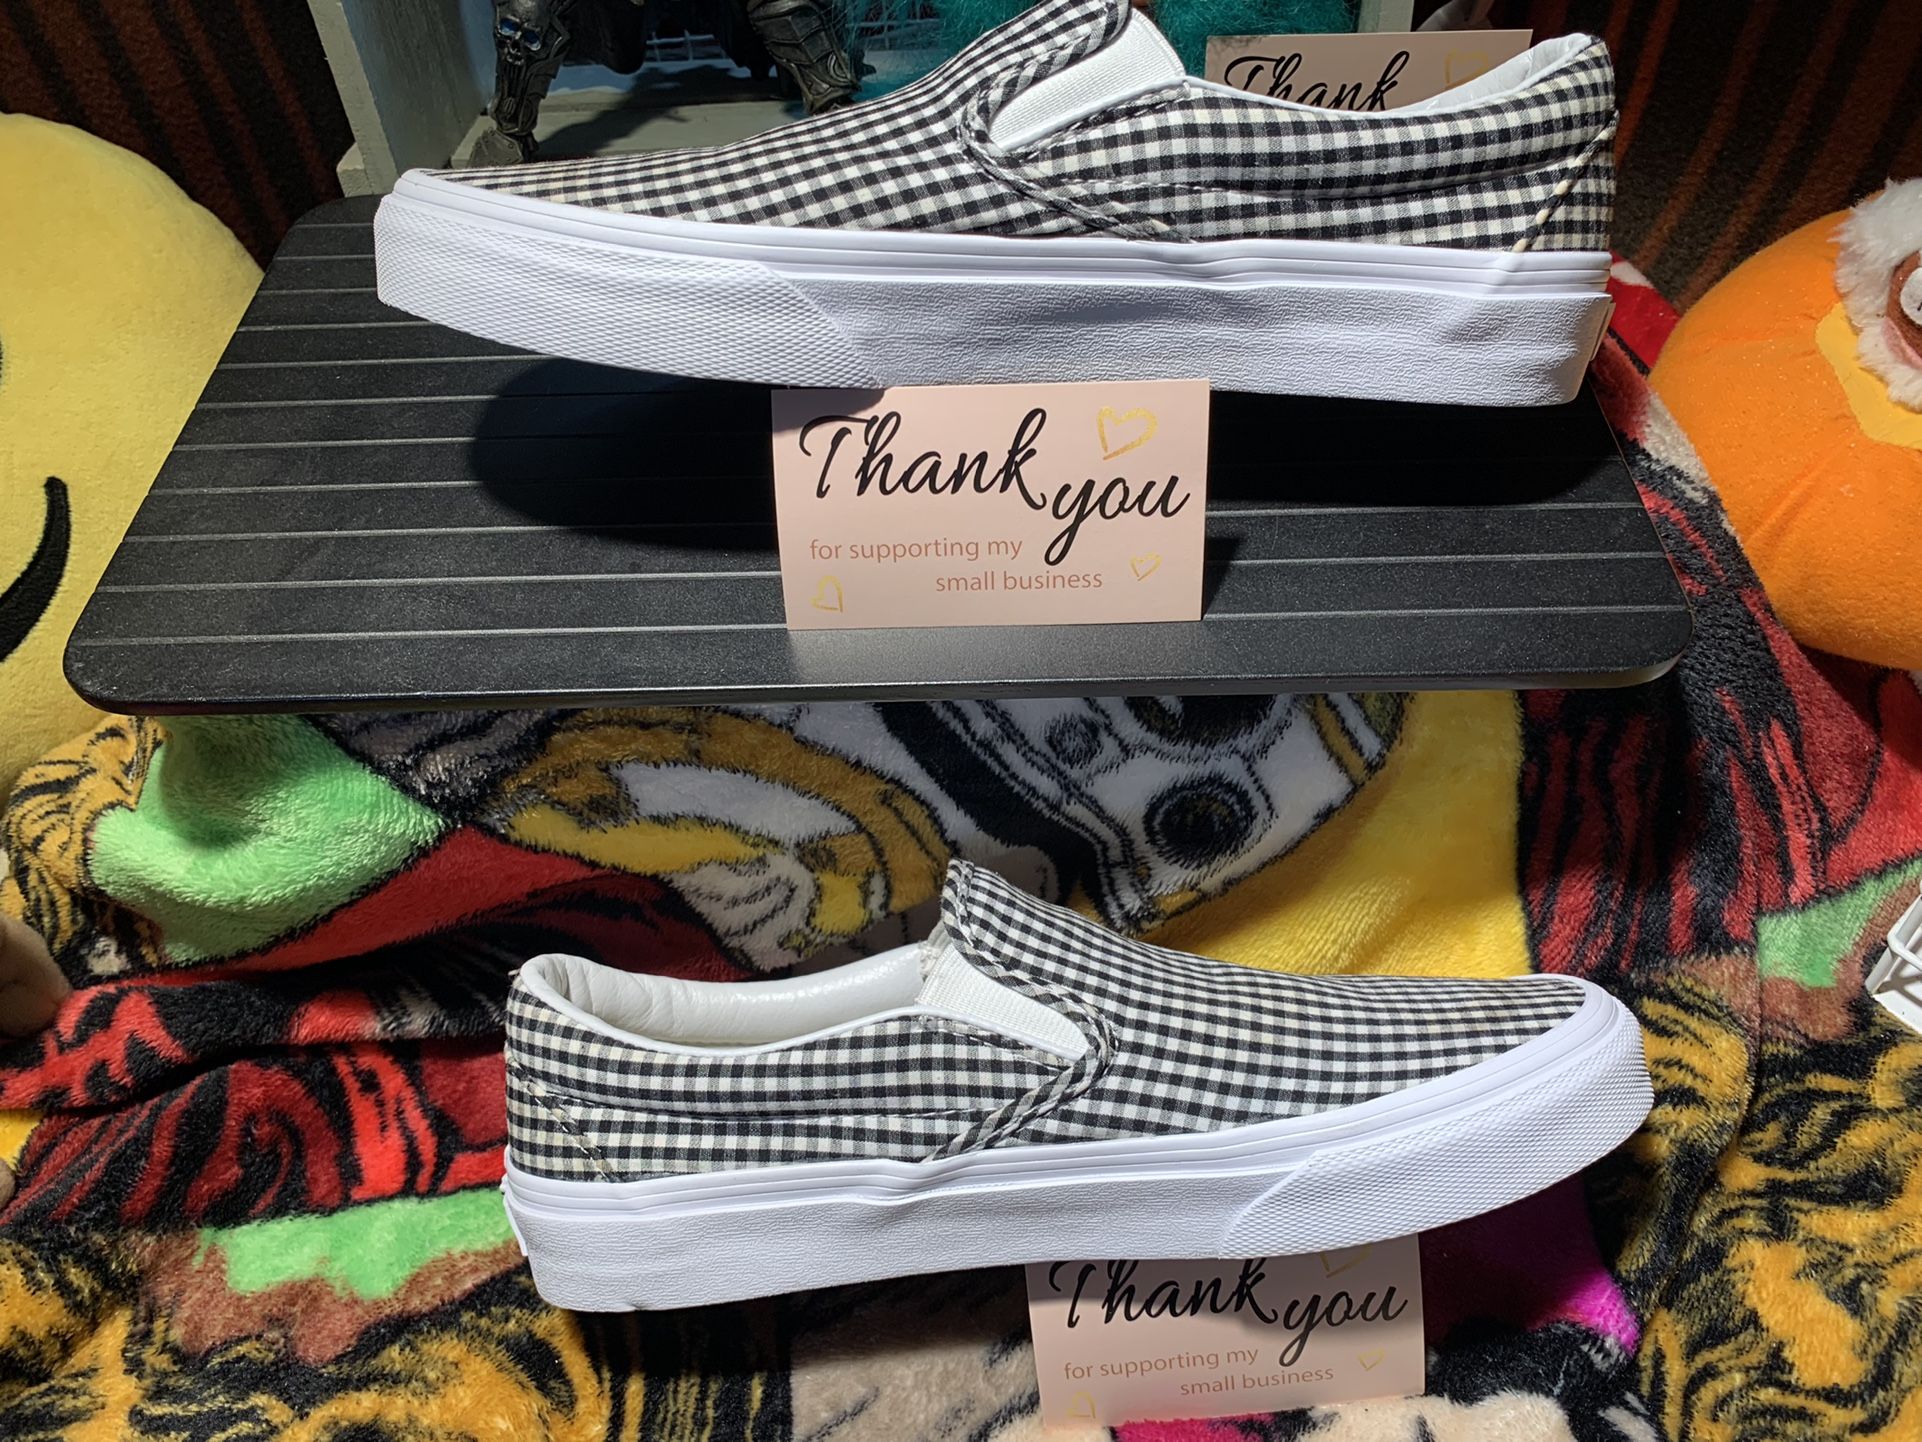 Women’s Size 8.5 VANS Mini Checkered Slip-On Shoes Good Condition Lots Of Life Left